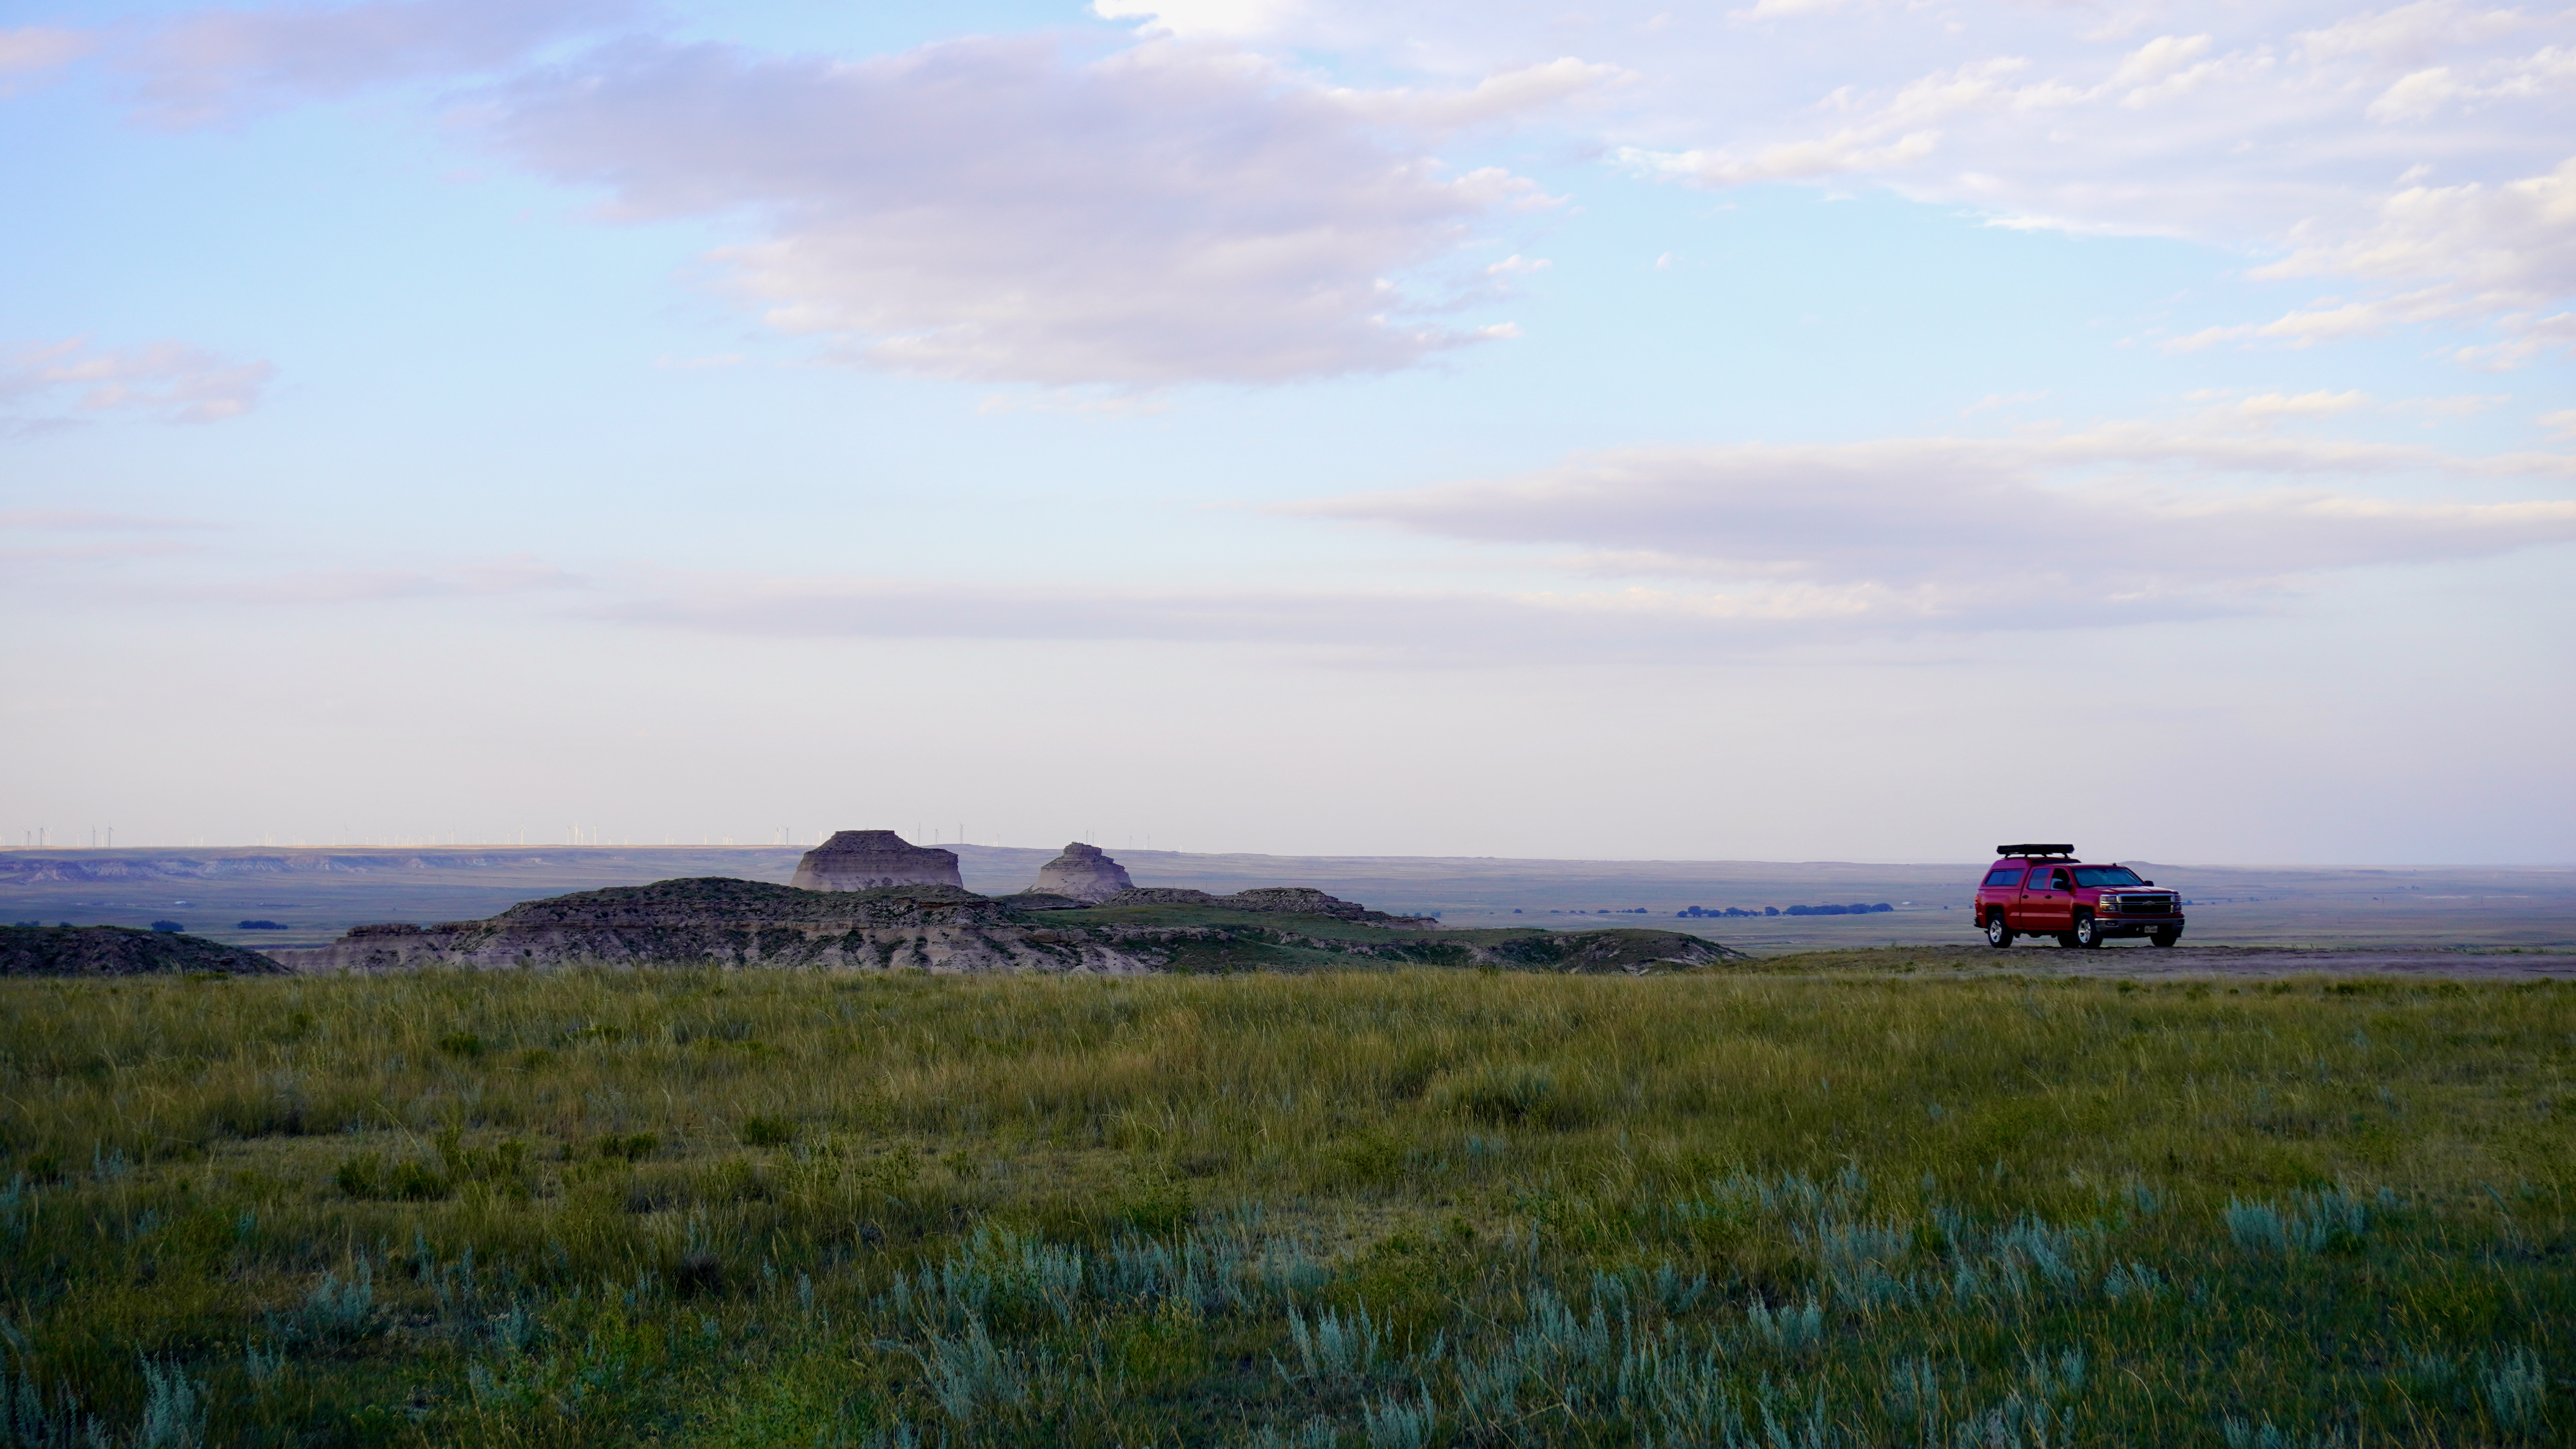 a red truck and pawnee buttes in the background